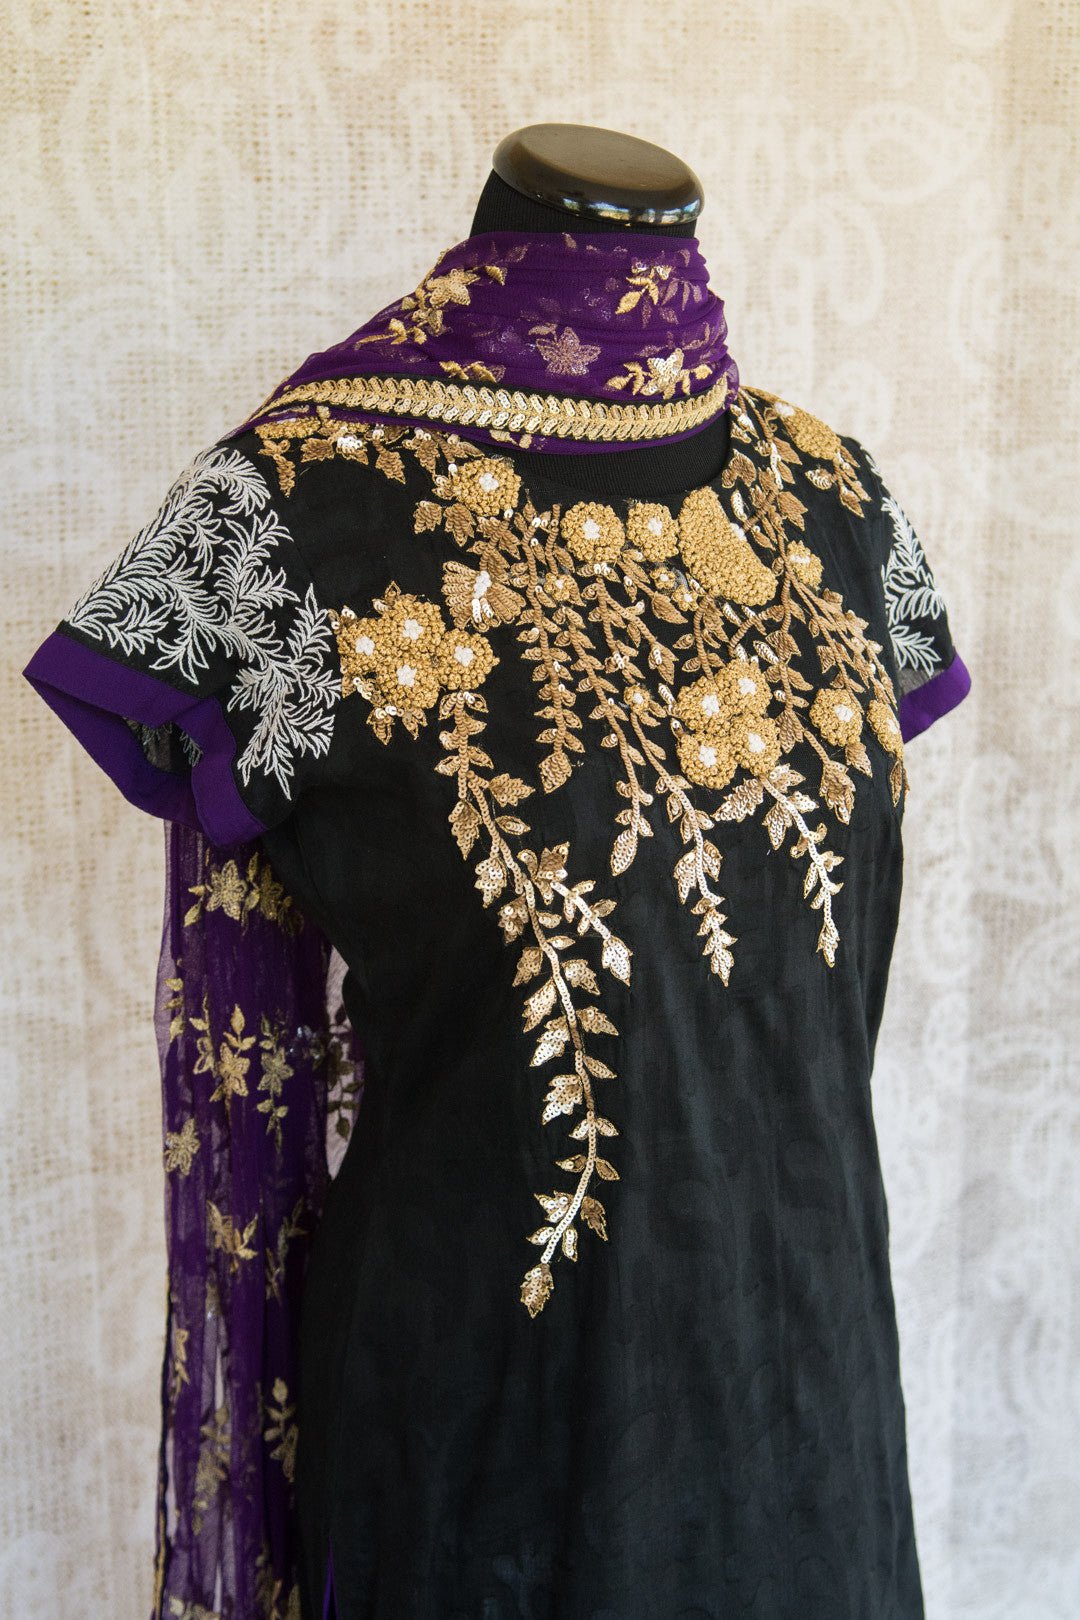 501076-suit-short-sleeve-black-purple-white-gold-silver-embroidery-scarf-alternate-top-view